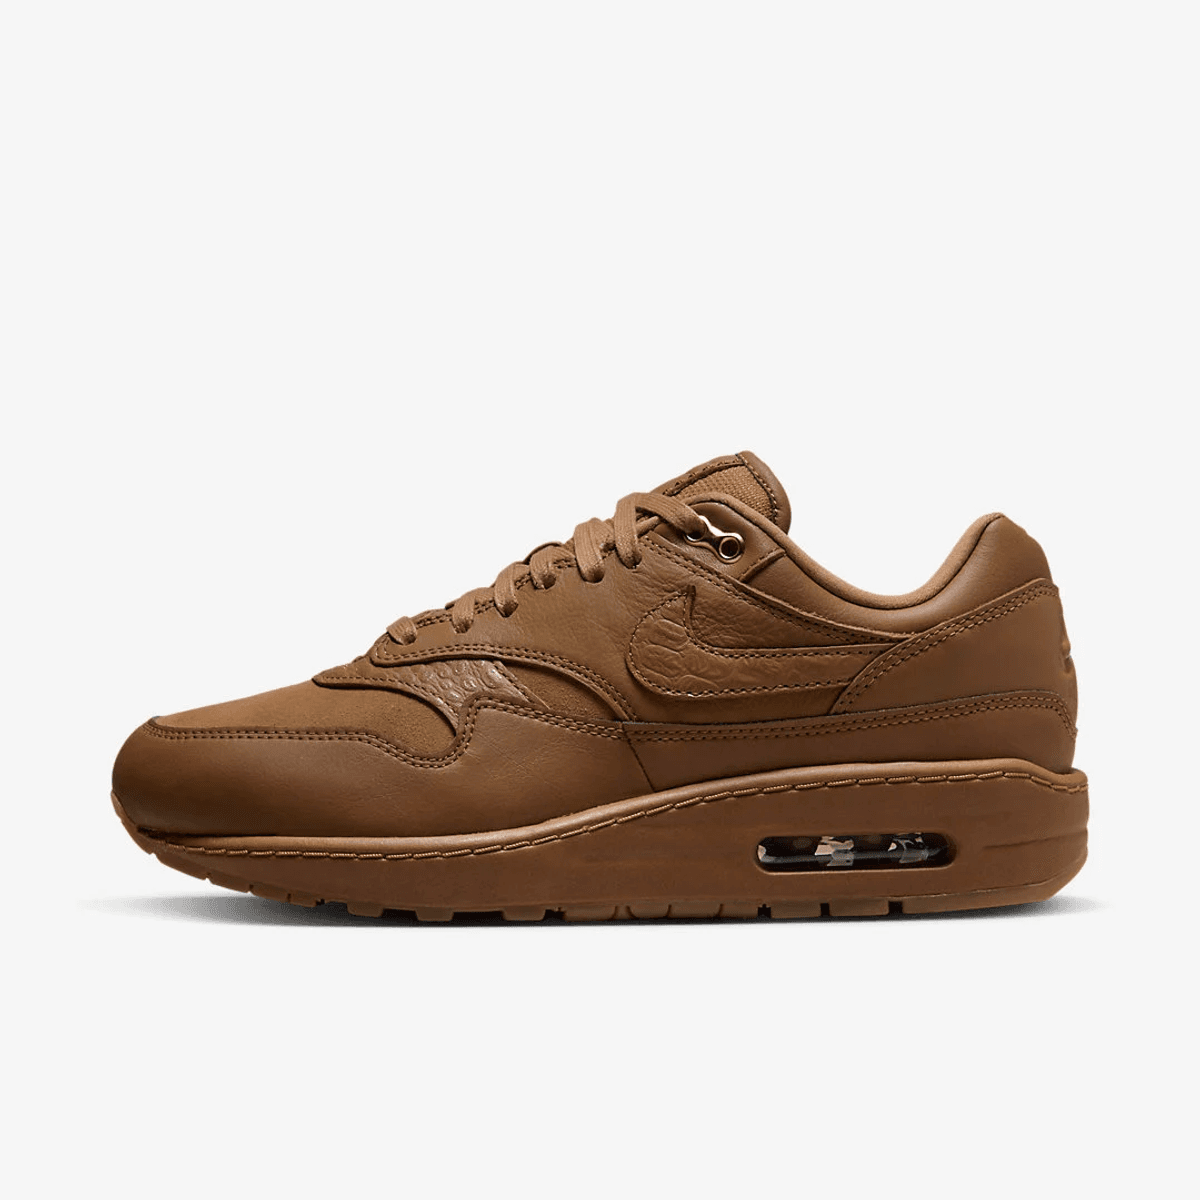 Nike Unveils A New Nike Air Max 1 '87 Ale Brown